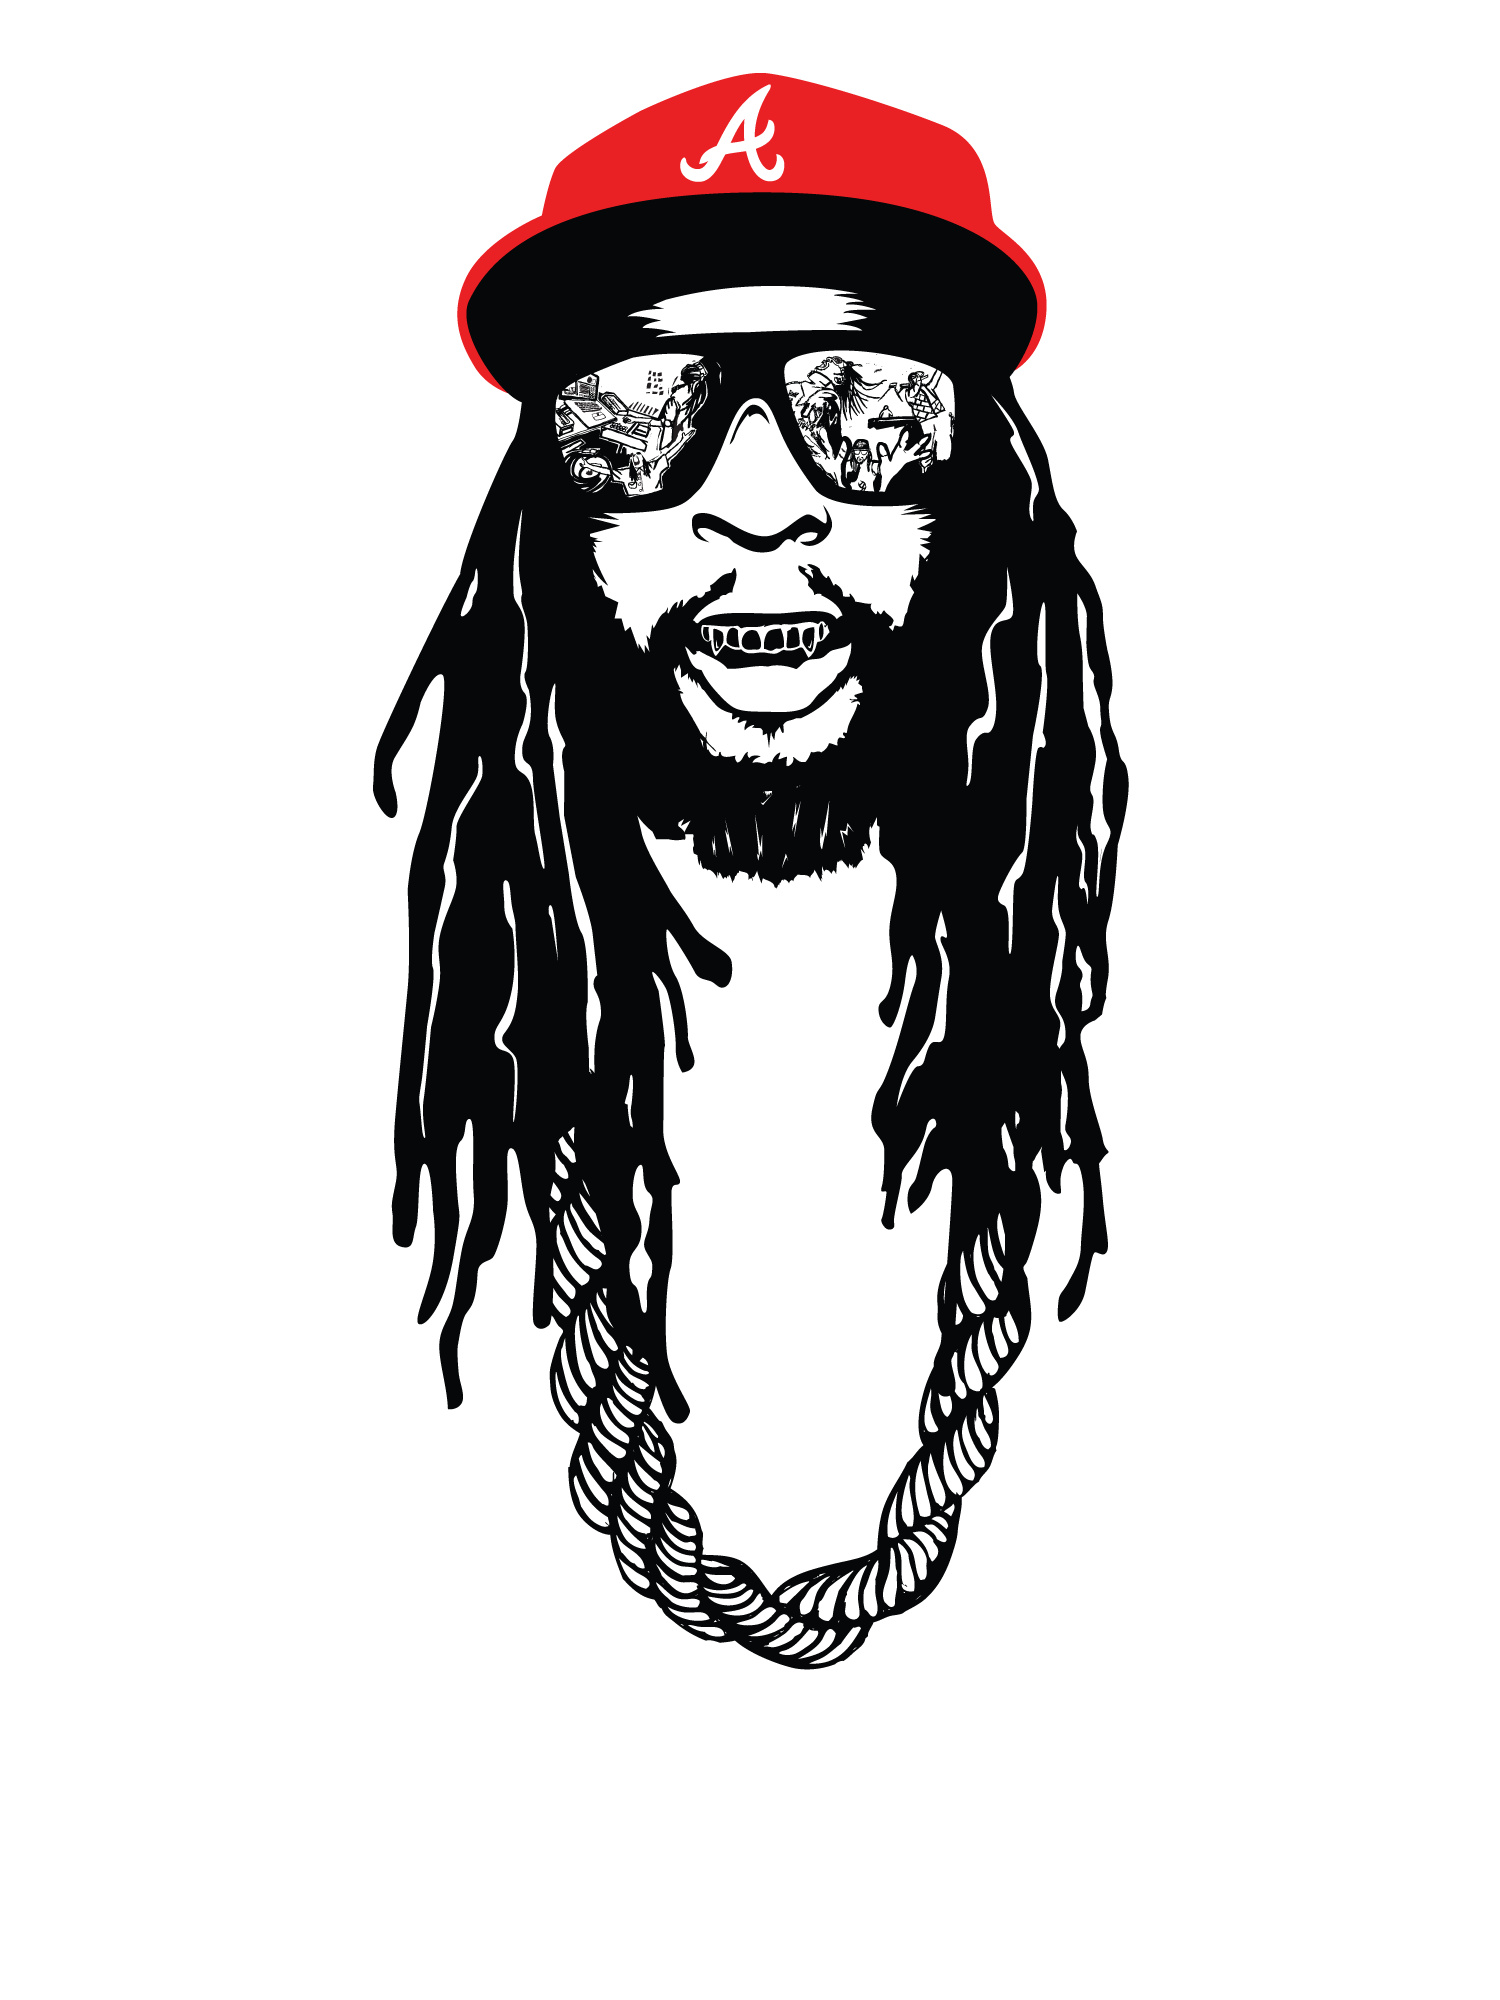 Free download Lil Jon, Lil Jon's pictures, Lil Jon's fameDesktop, Mobile and Tablet, 1500x2000 HD Phone